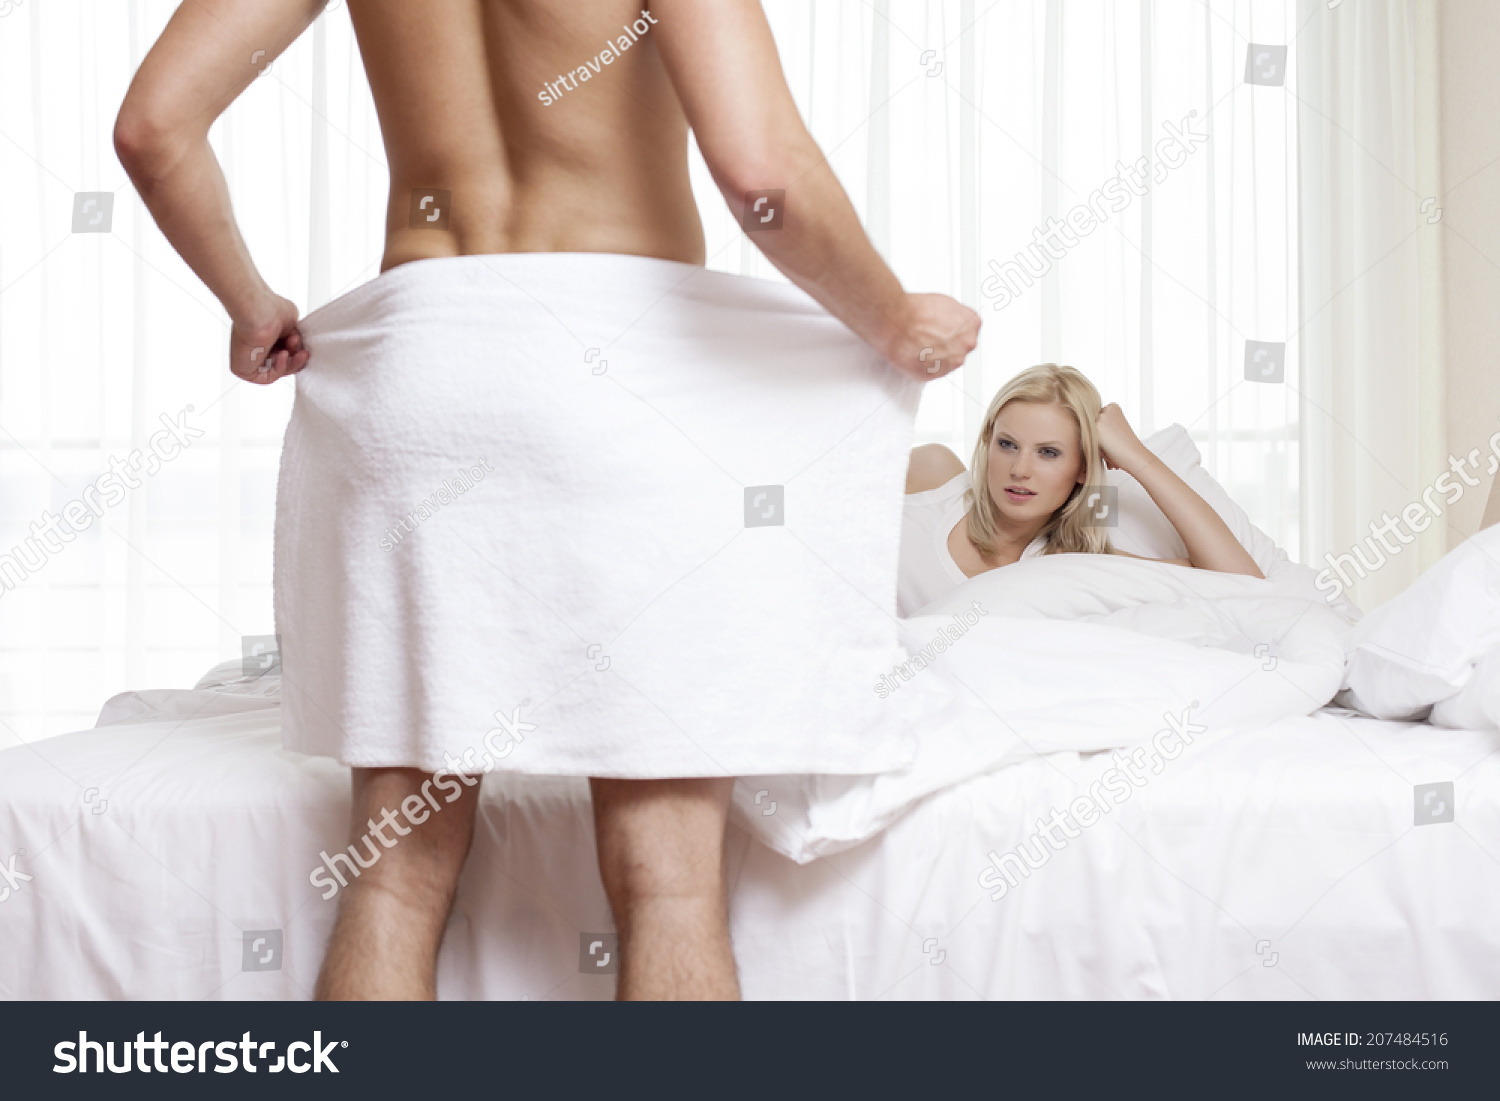 Young Woman Staring At Naked Man Holding Towel In Bedroom 